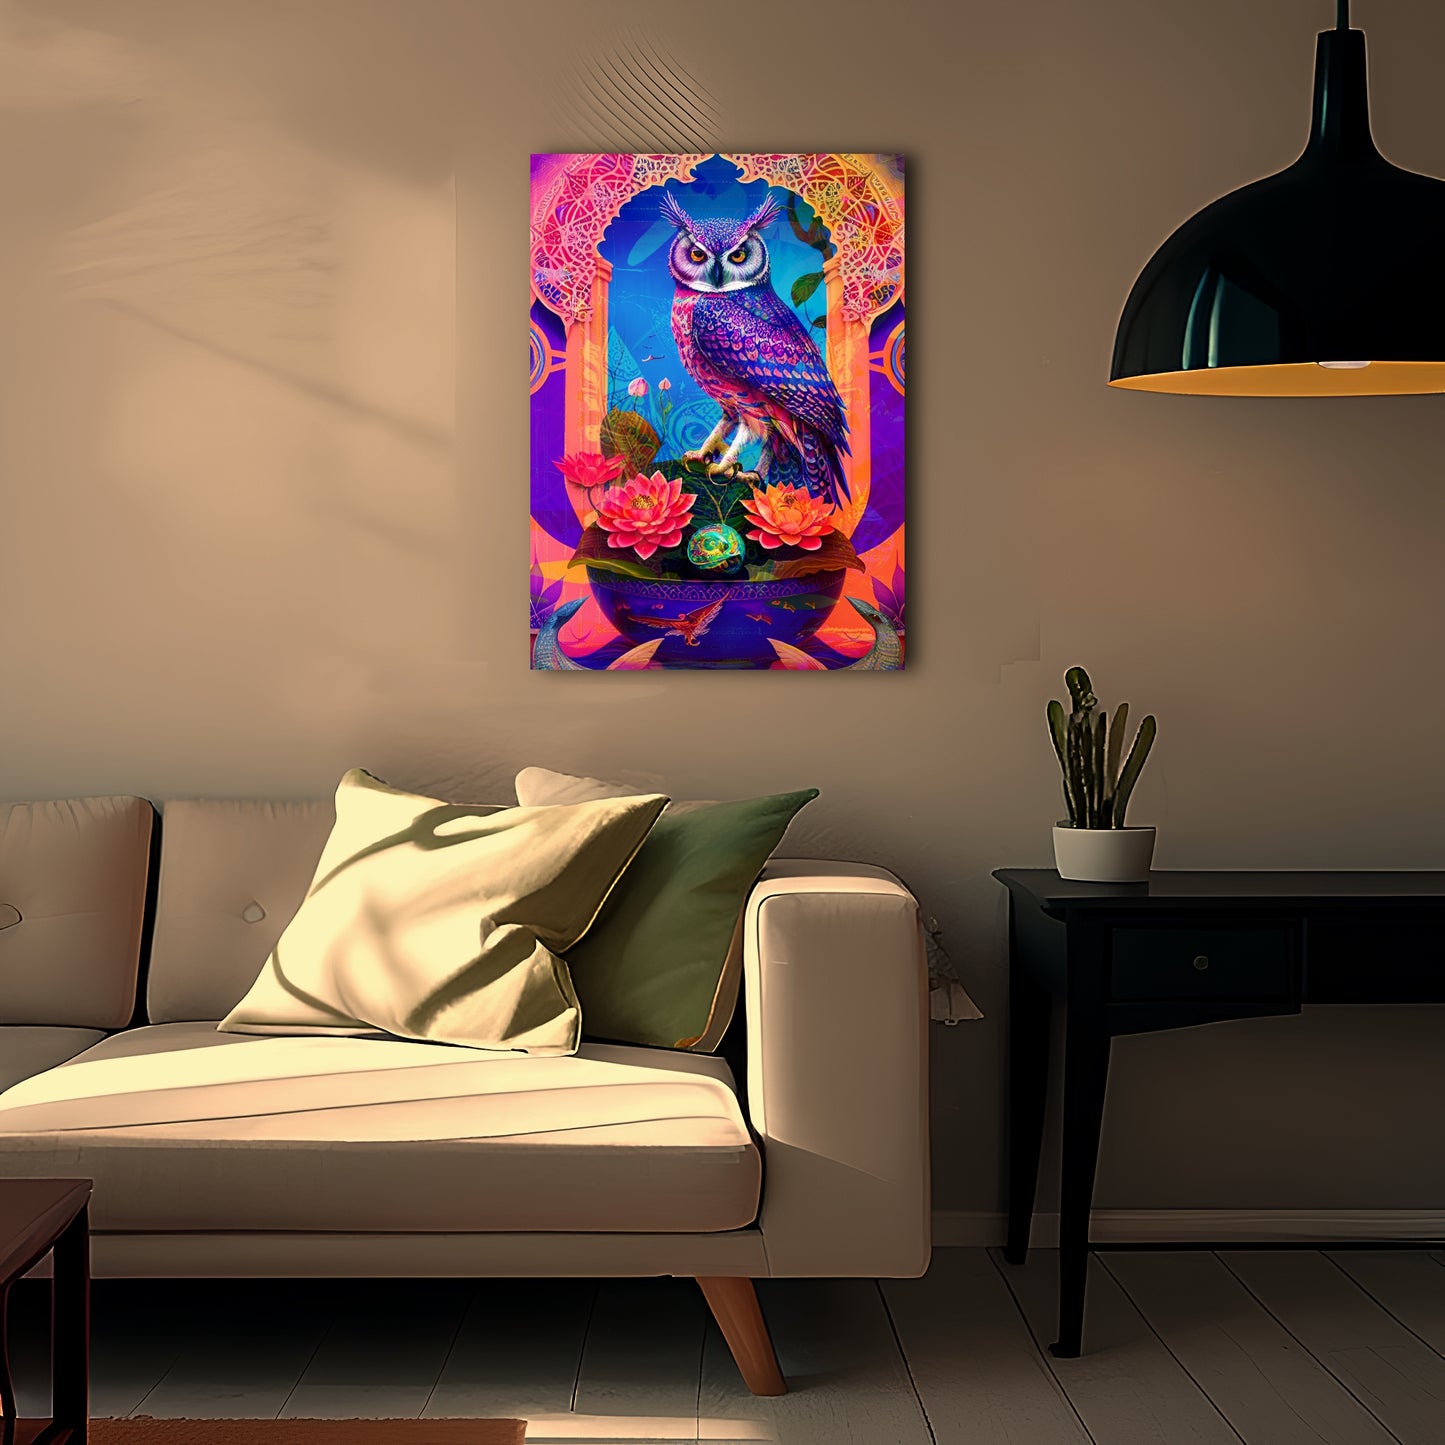 Psychedelic Owl on Flower Pot Metal Poster